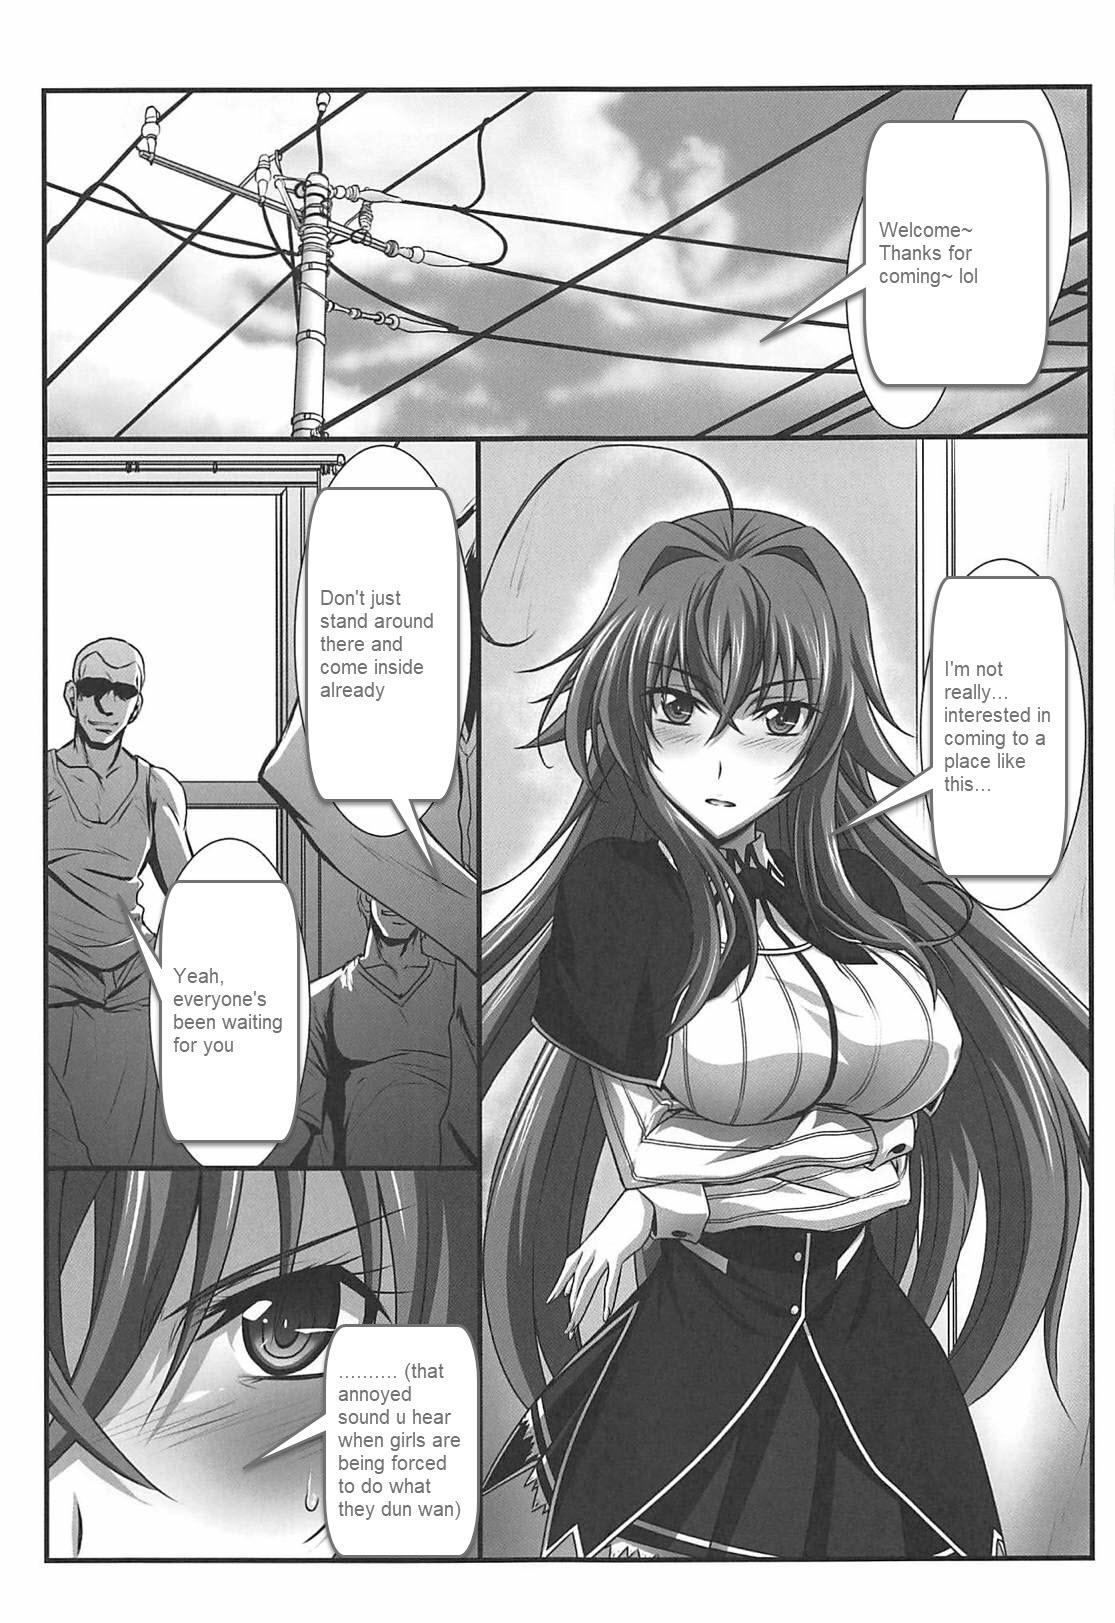 Mother fuck SPIRAL ZONE DxD II - Highschool dxd Sucking Cock - Page 4